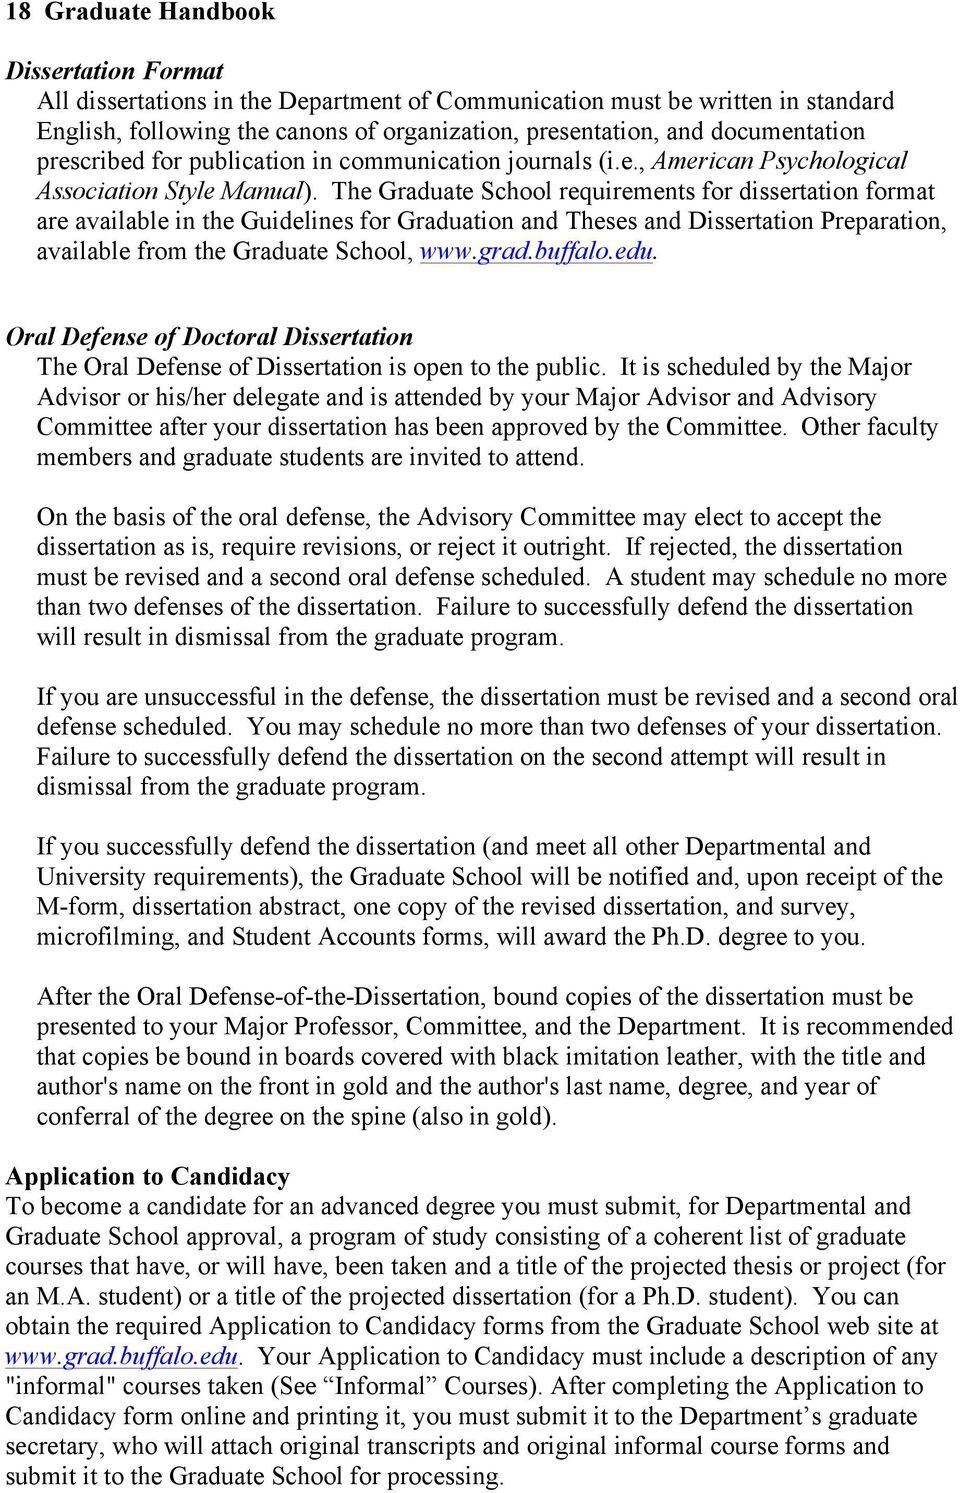 The Graduate School requirements for dissertation format are available in the Guidelines for Graduation and Theses and Dissertation Preparation, available from the Graduate School, www.grad.buffalo.